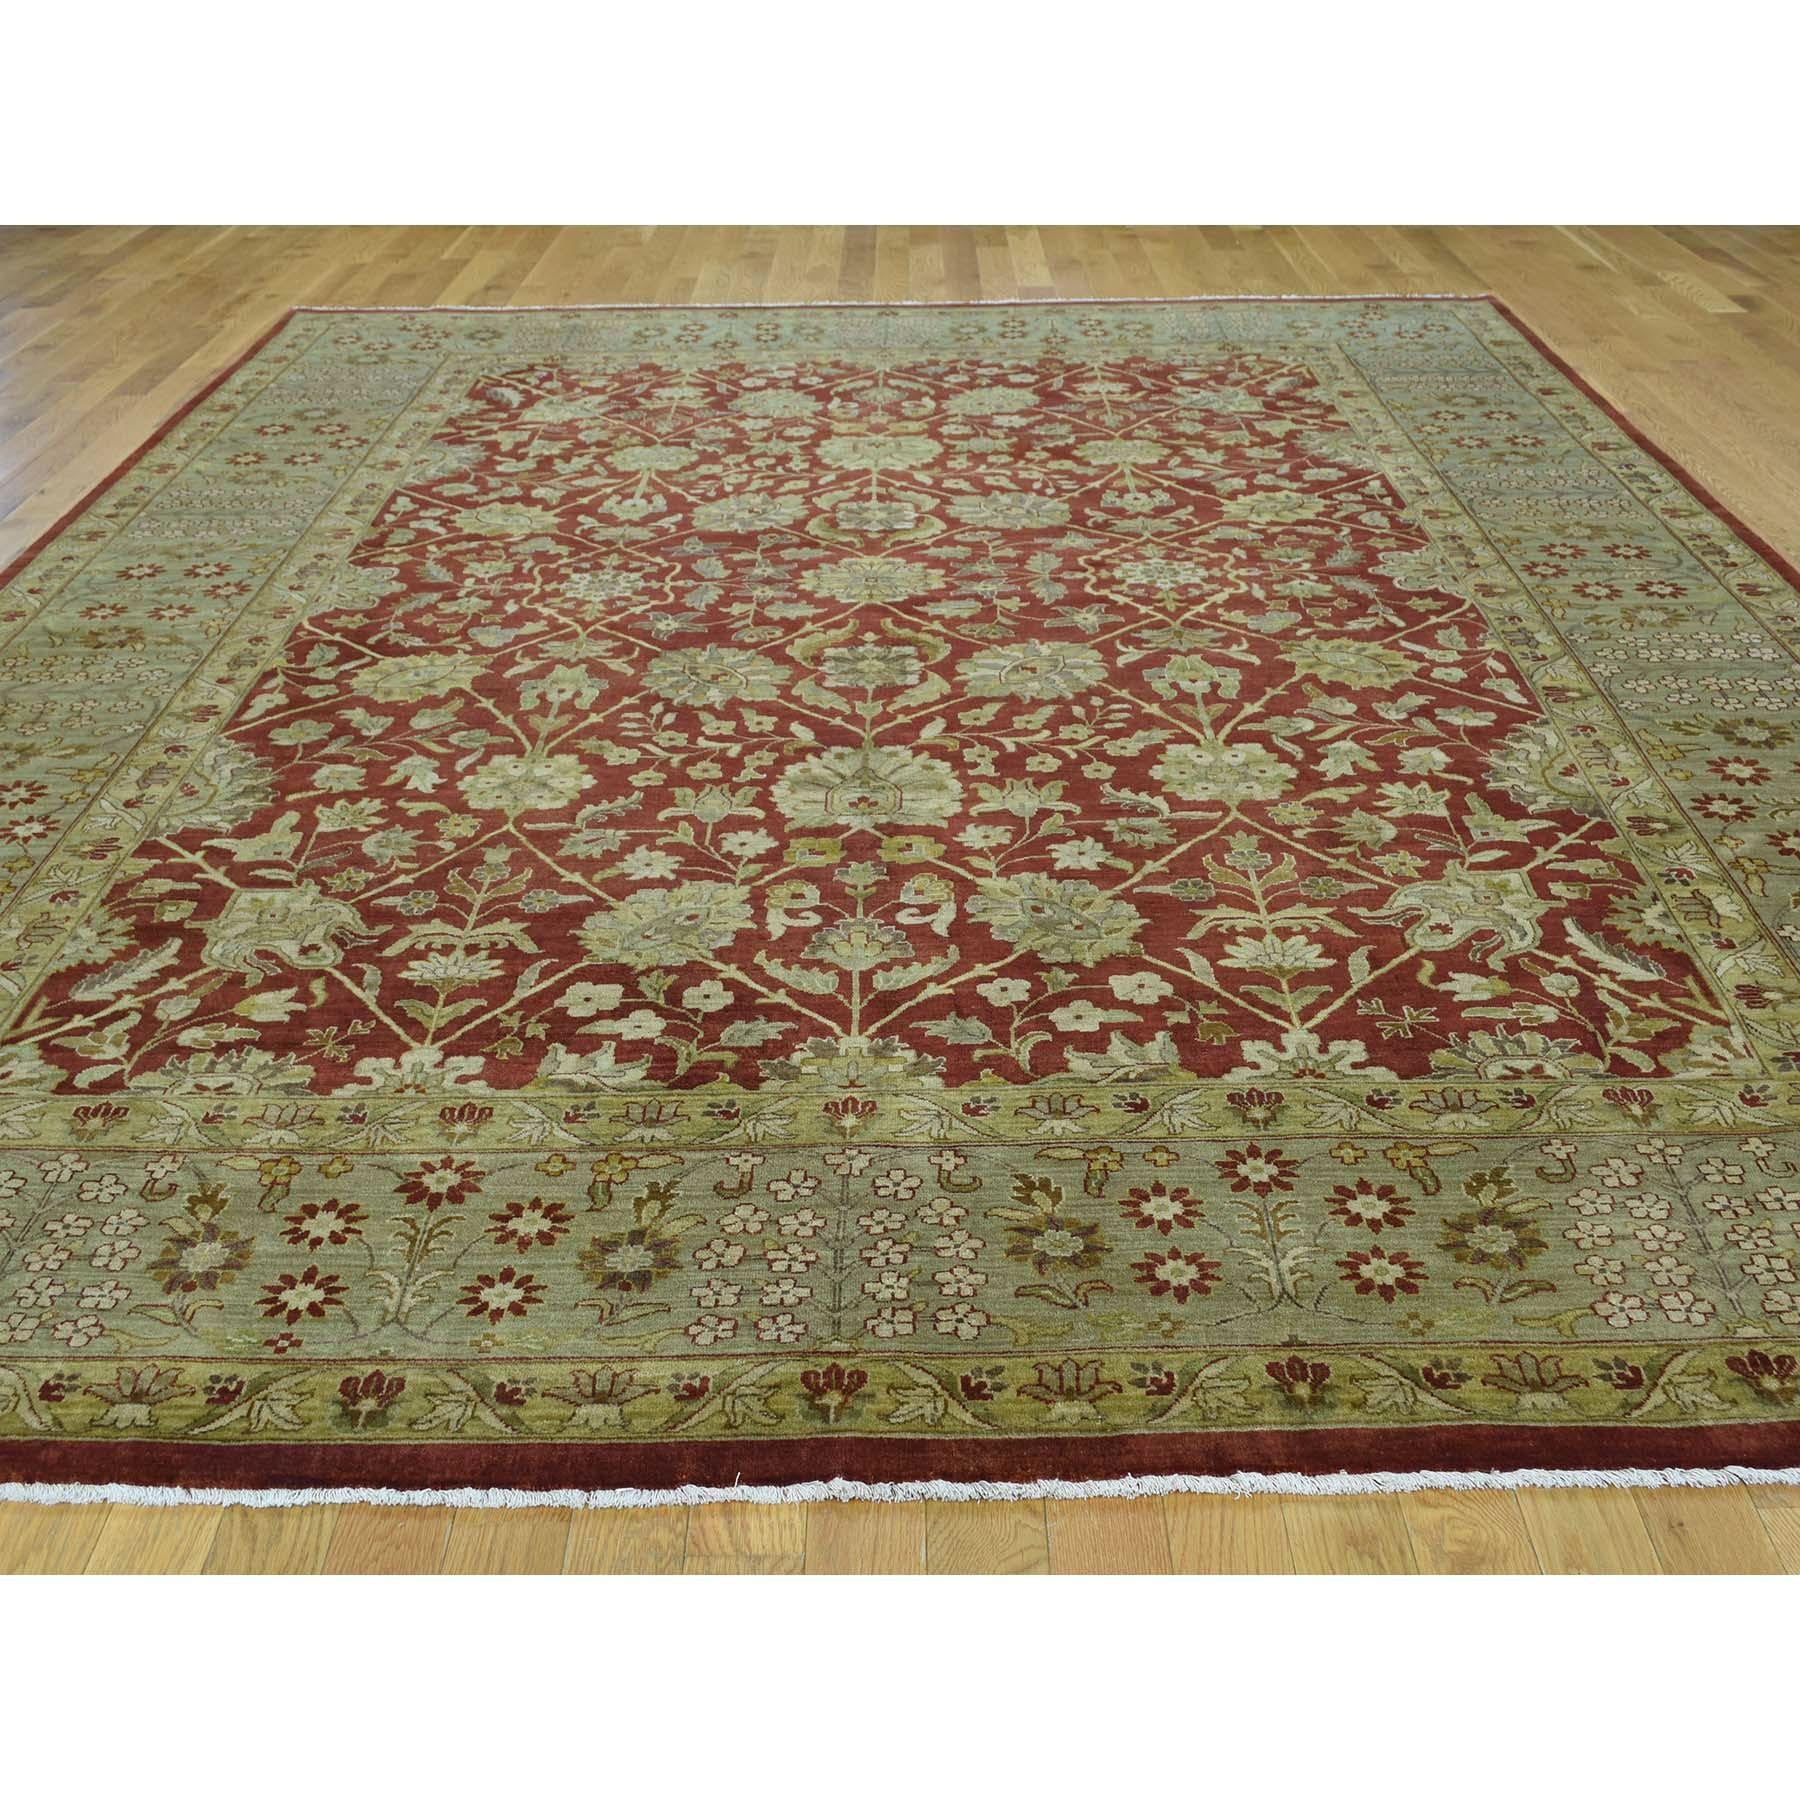 This is a truly genuine one-of-a-kind antiqued Tabriz fine Oriental hand knotted closeout sale rug. It has been knotted for months and months in the centuries-old Persian weaving craftsmanship techniques by expert artisans. Measures: